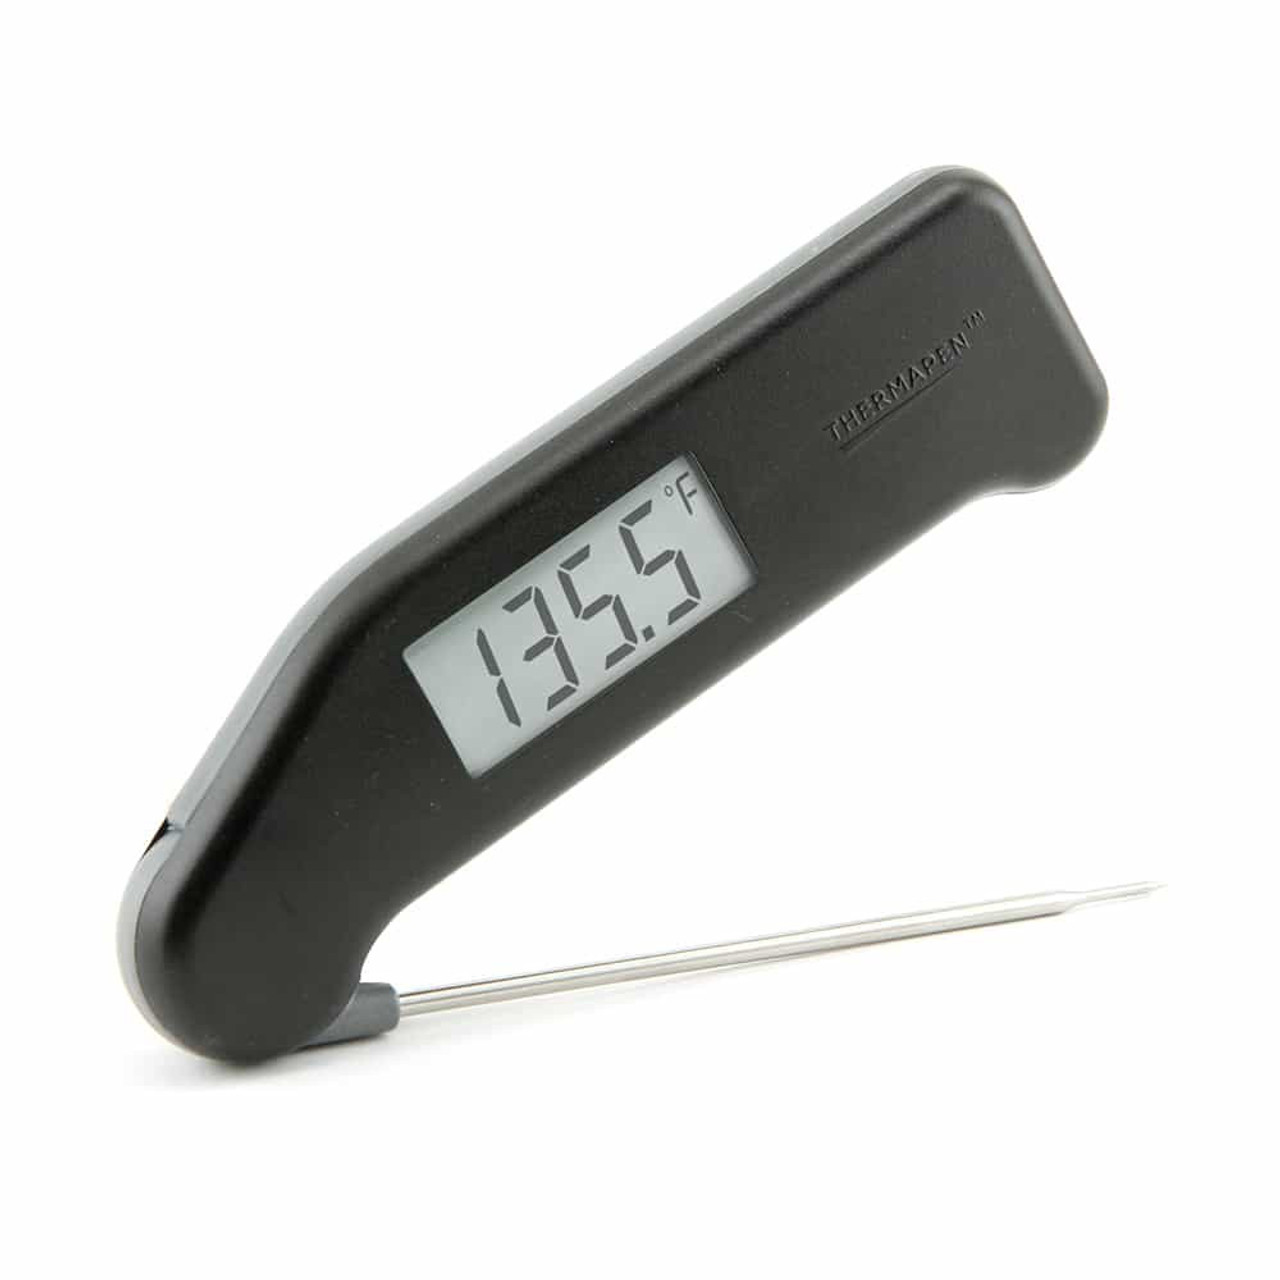 SuperFast Thermapen ONE Thermometer - Digital Instant Read Meat